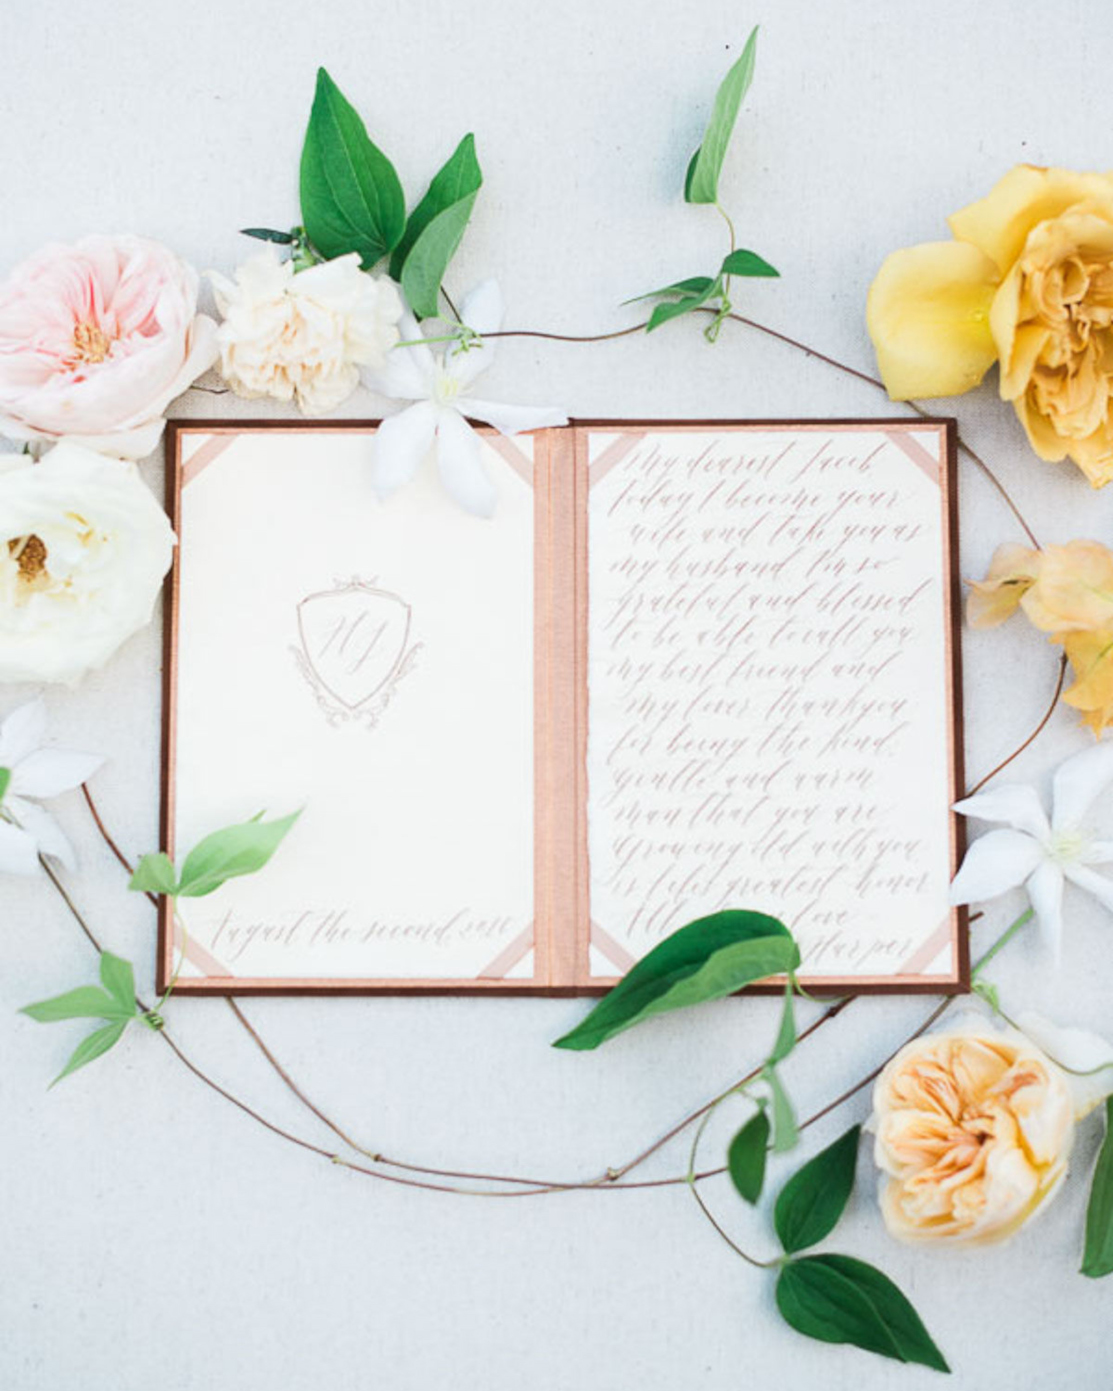 How to Plan a Thoughtful Bilingual Wedding // Lovely & Planned #weddingtips